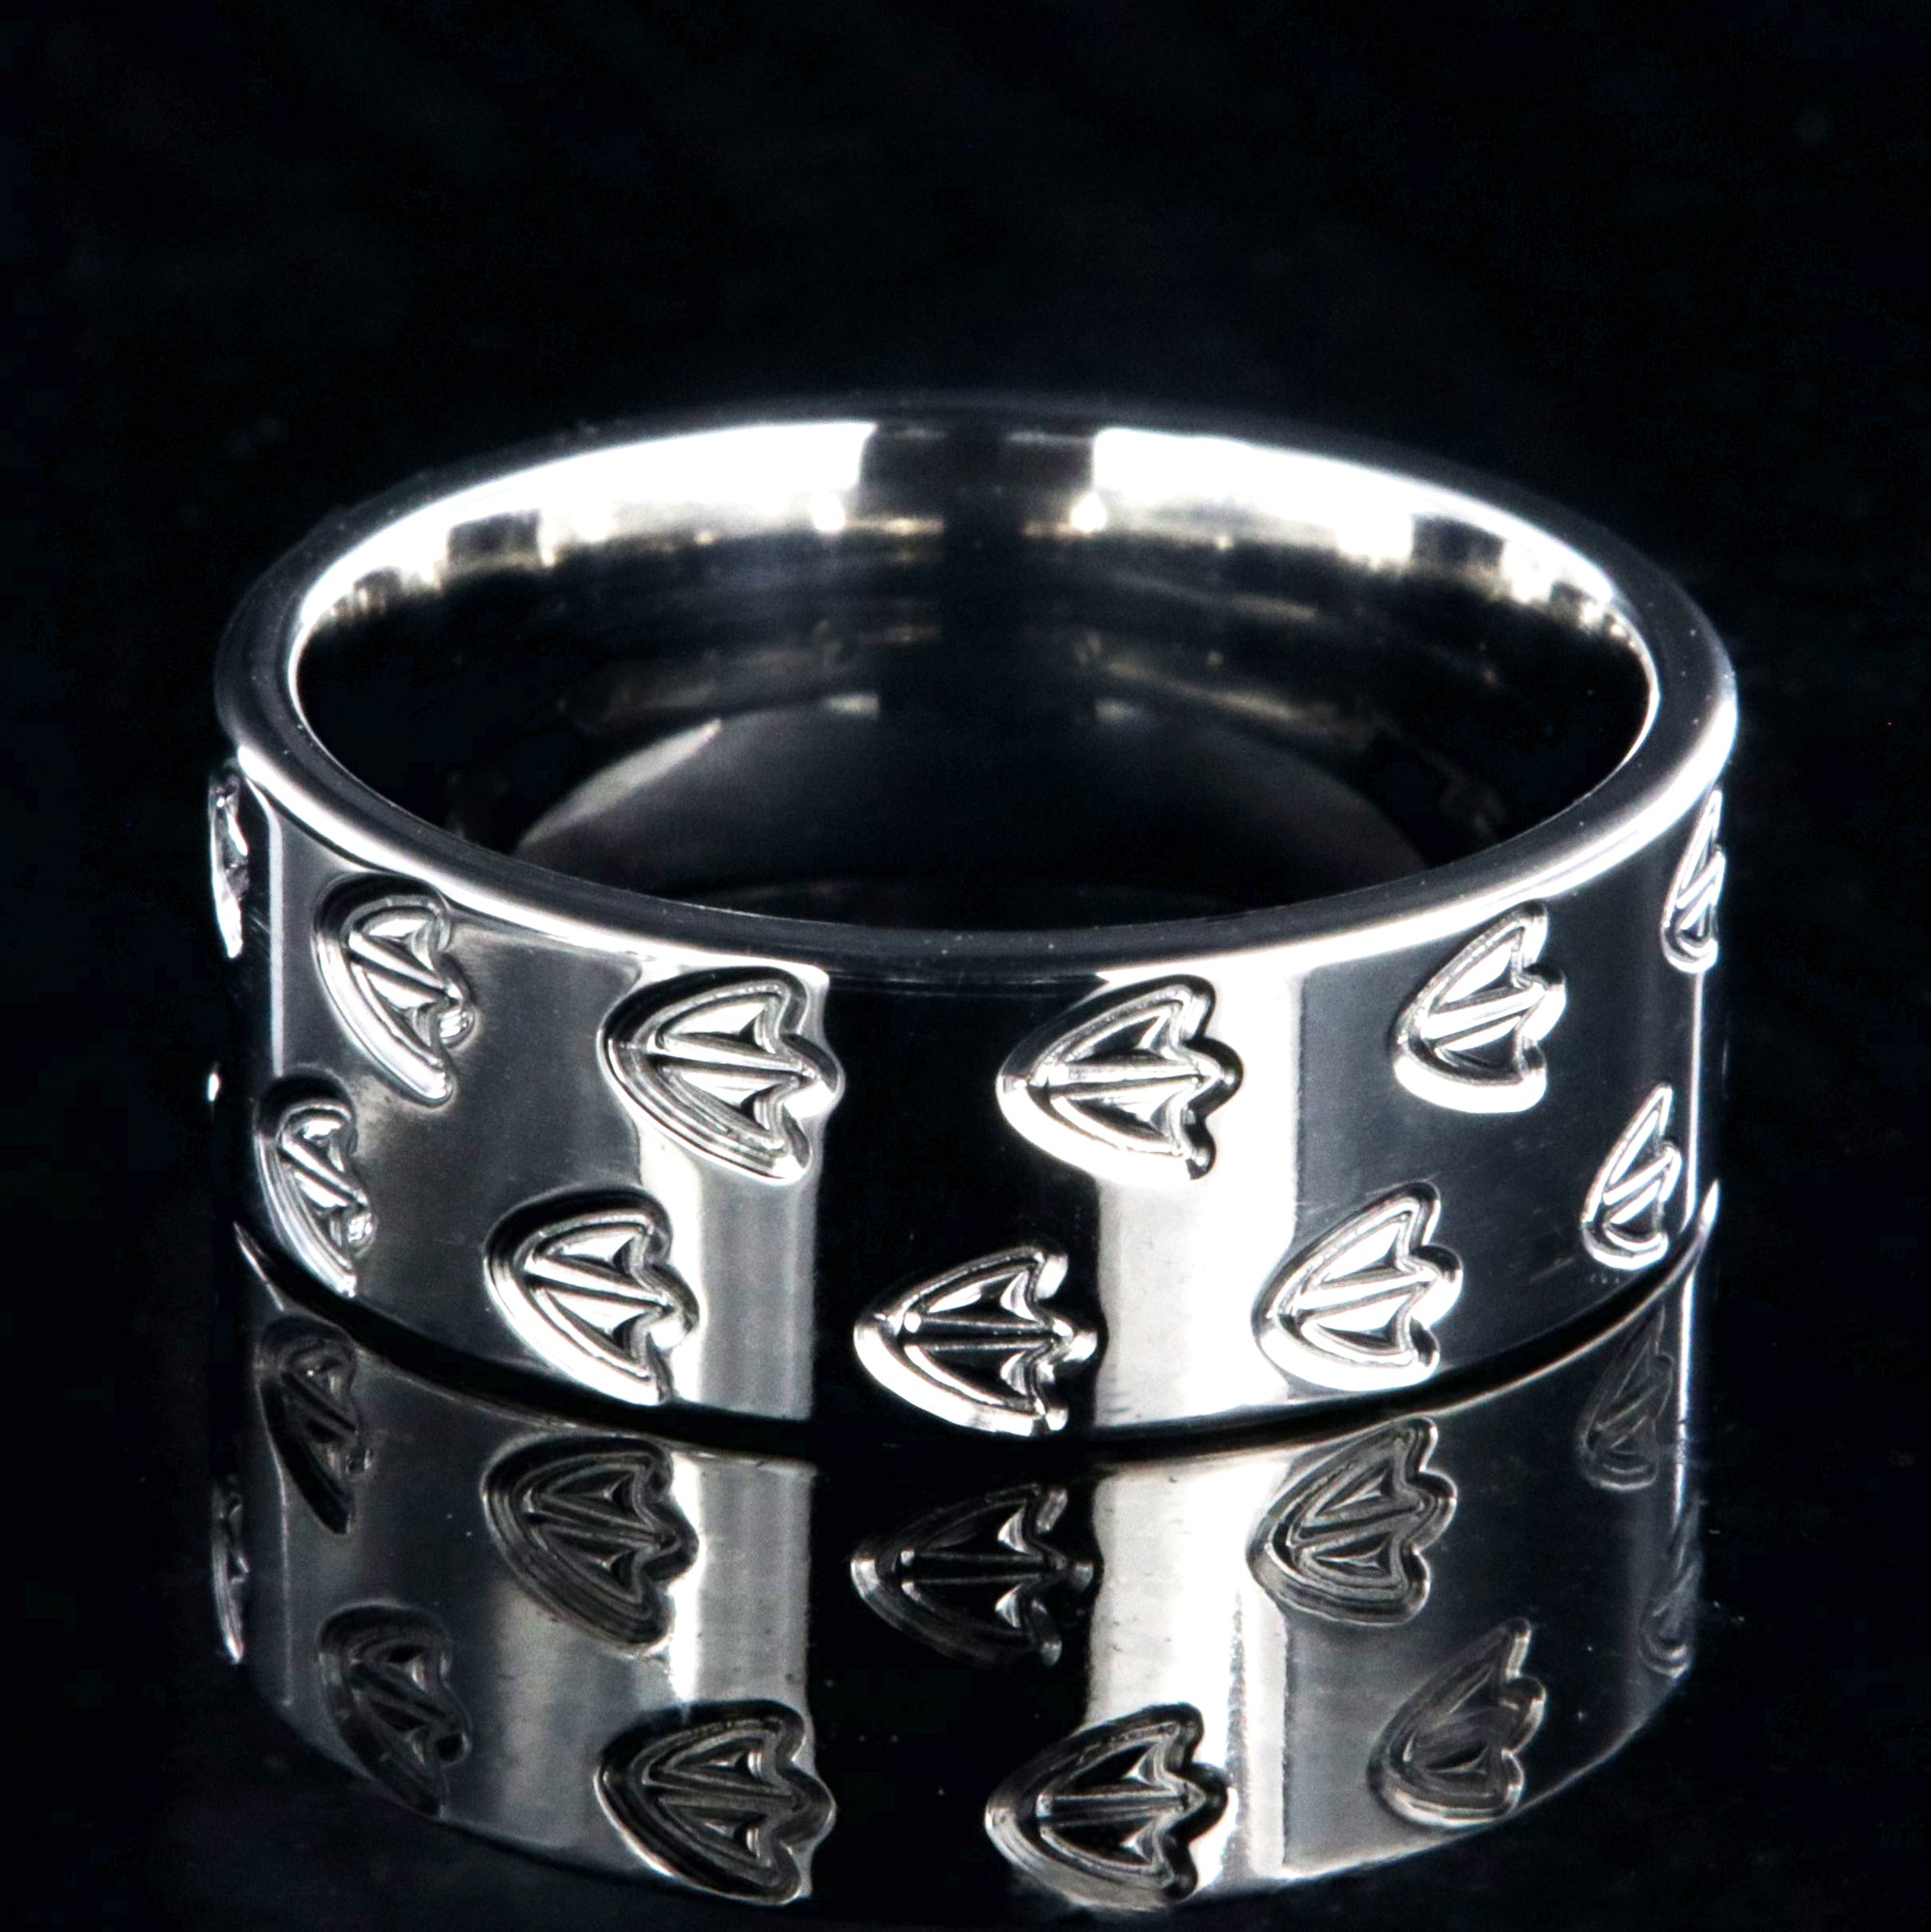 8mm wide titanium duck band ring with duck footprint tracks